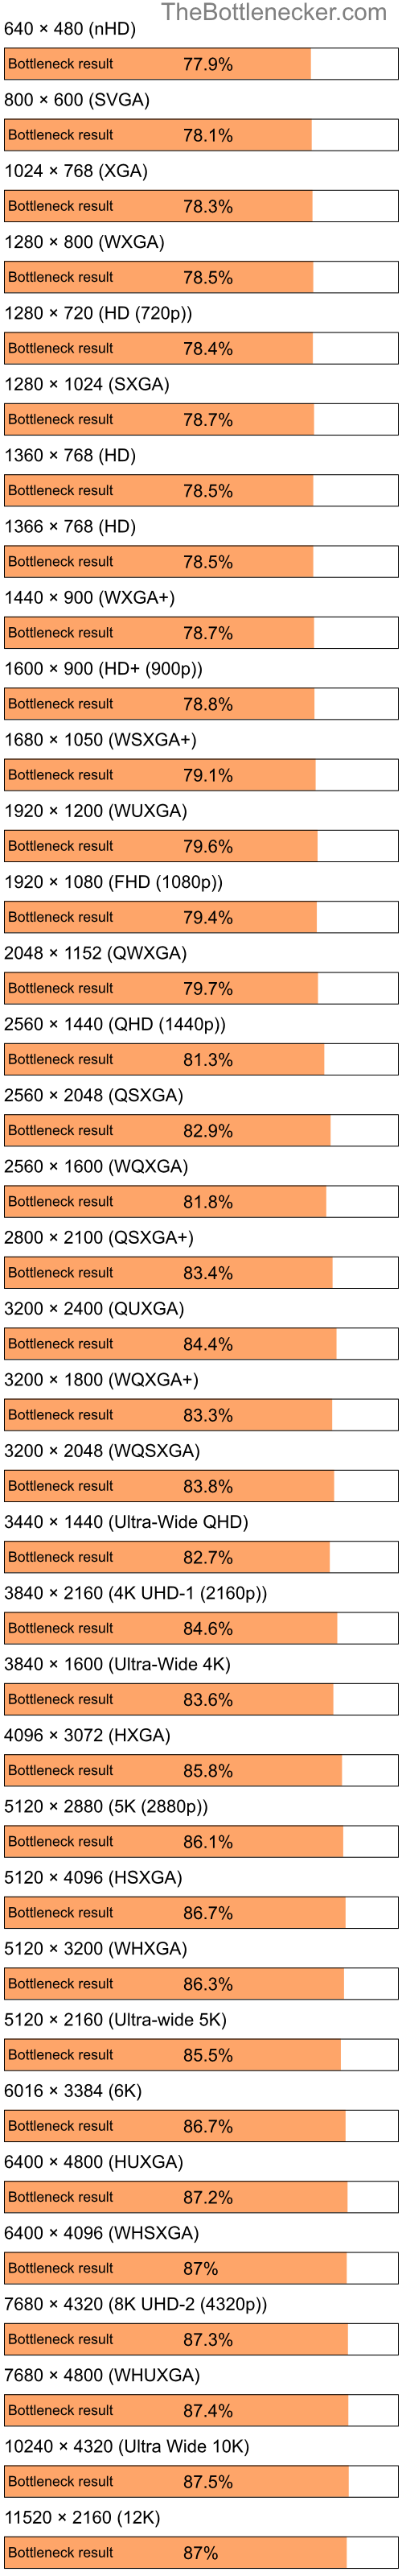 Bottleneck results by resolution for Intel Celeron M 410 and Intel G33 in Graphic Card Intense Tasks